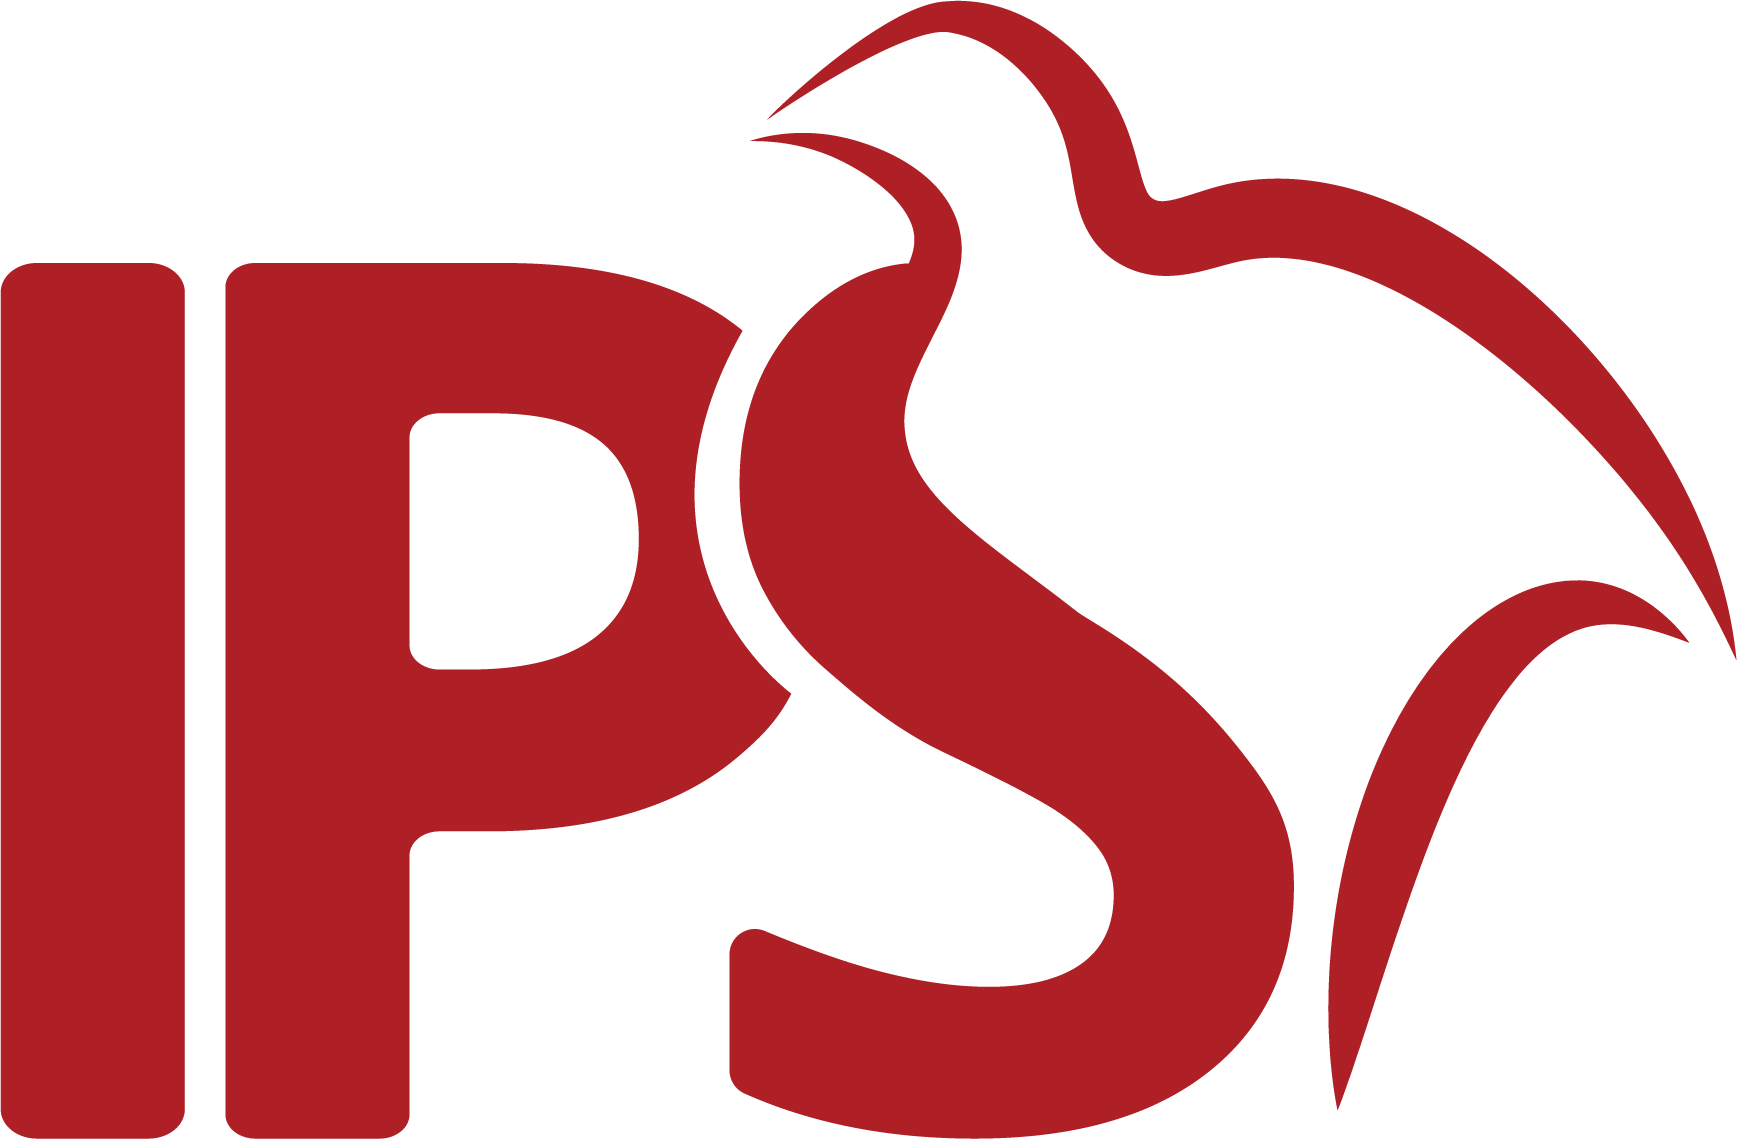 International Poultry Services (IPS)